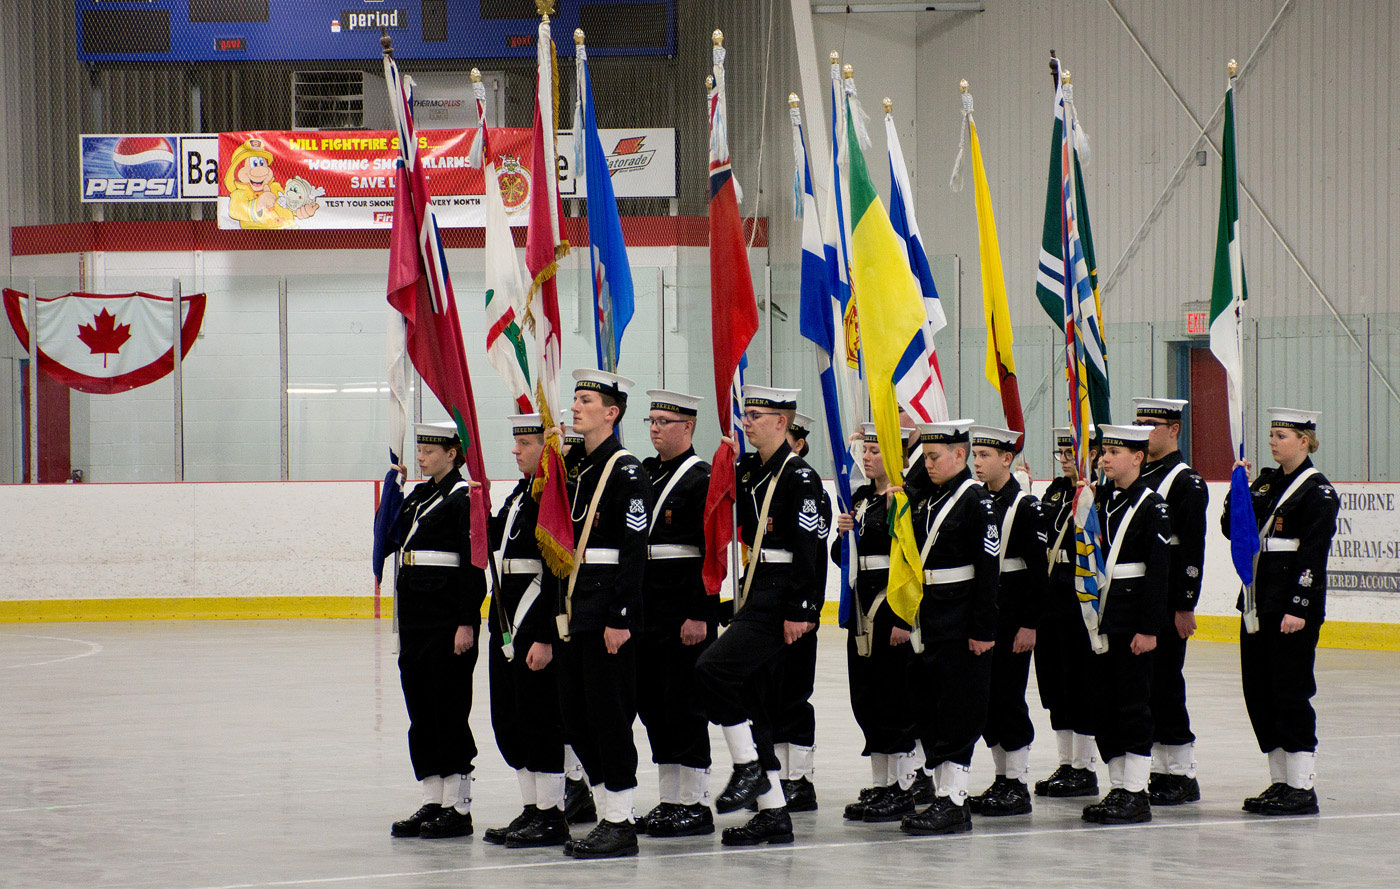 Skeena Sea Cadets - with flags of Confederation